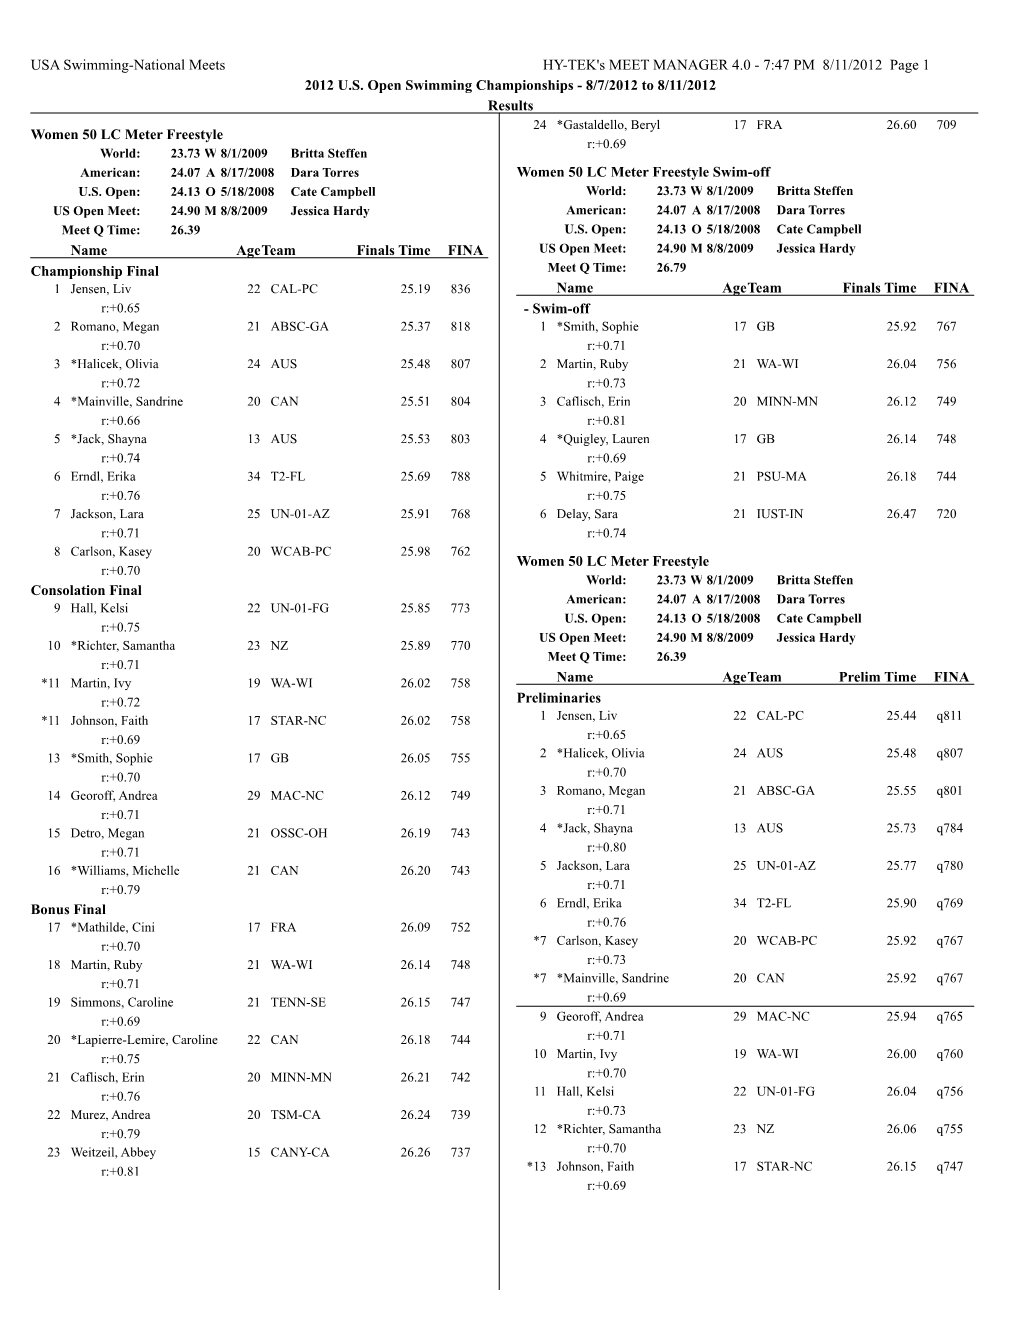 USA Swimming-National Meets HY-TEK's MEET MANAGER 4.0 - 7:47 PM 8/11/2012 Page 1 2012 U.S